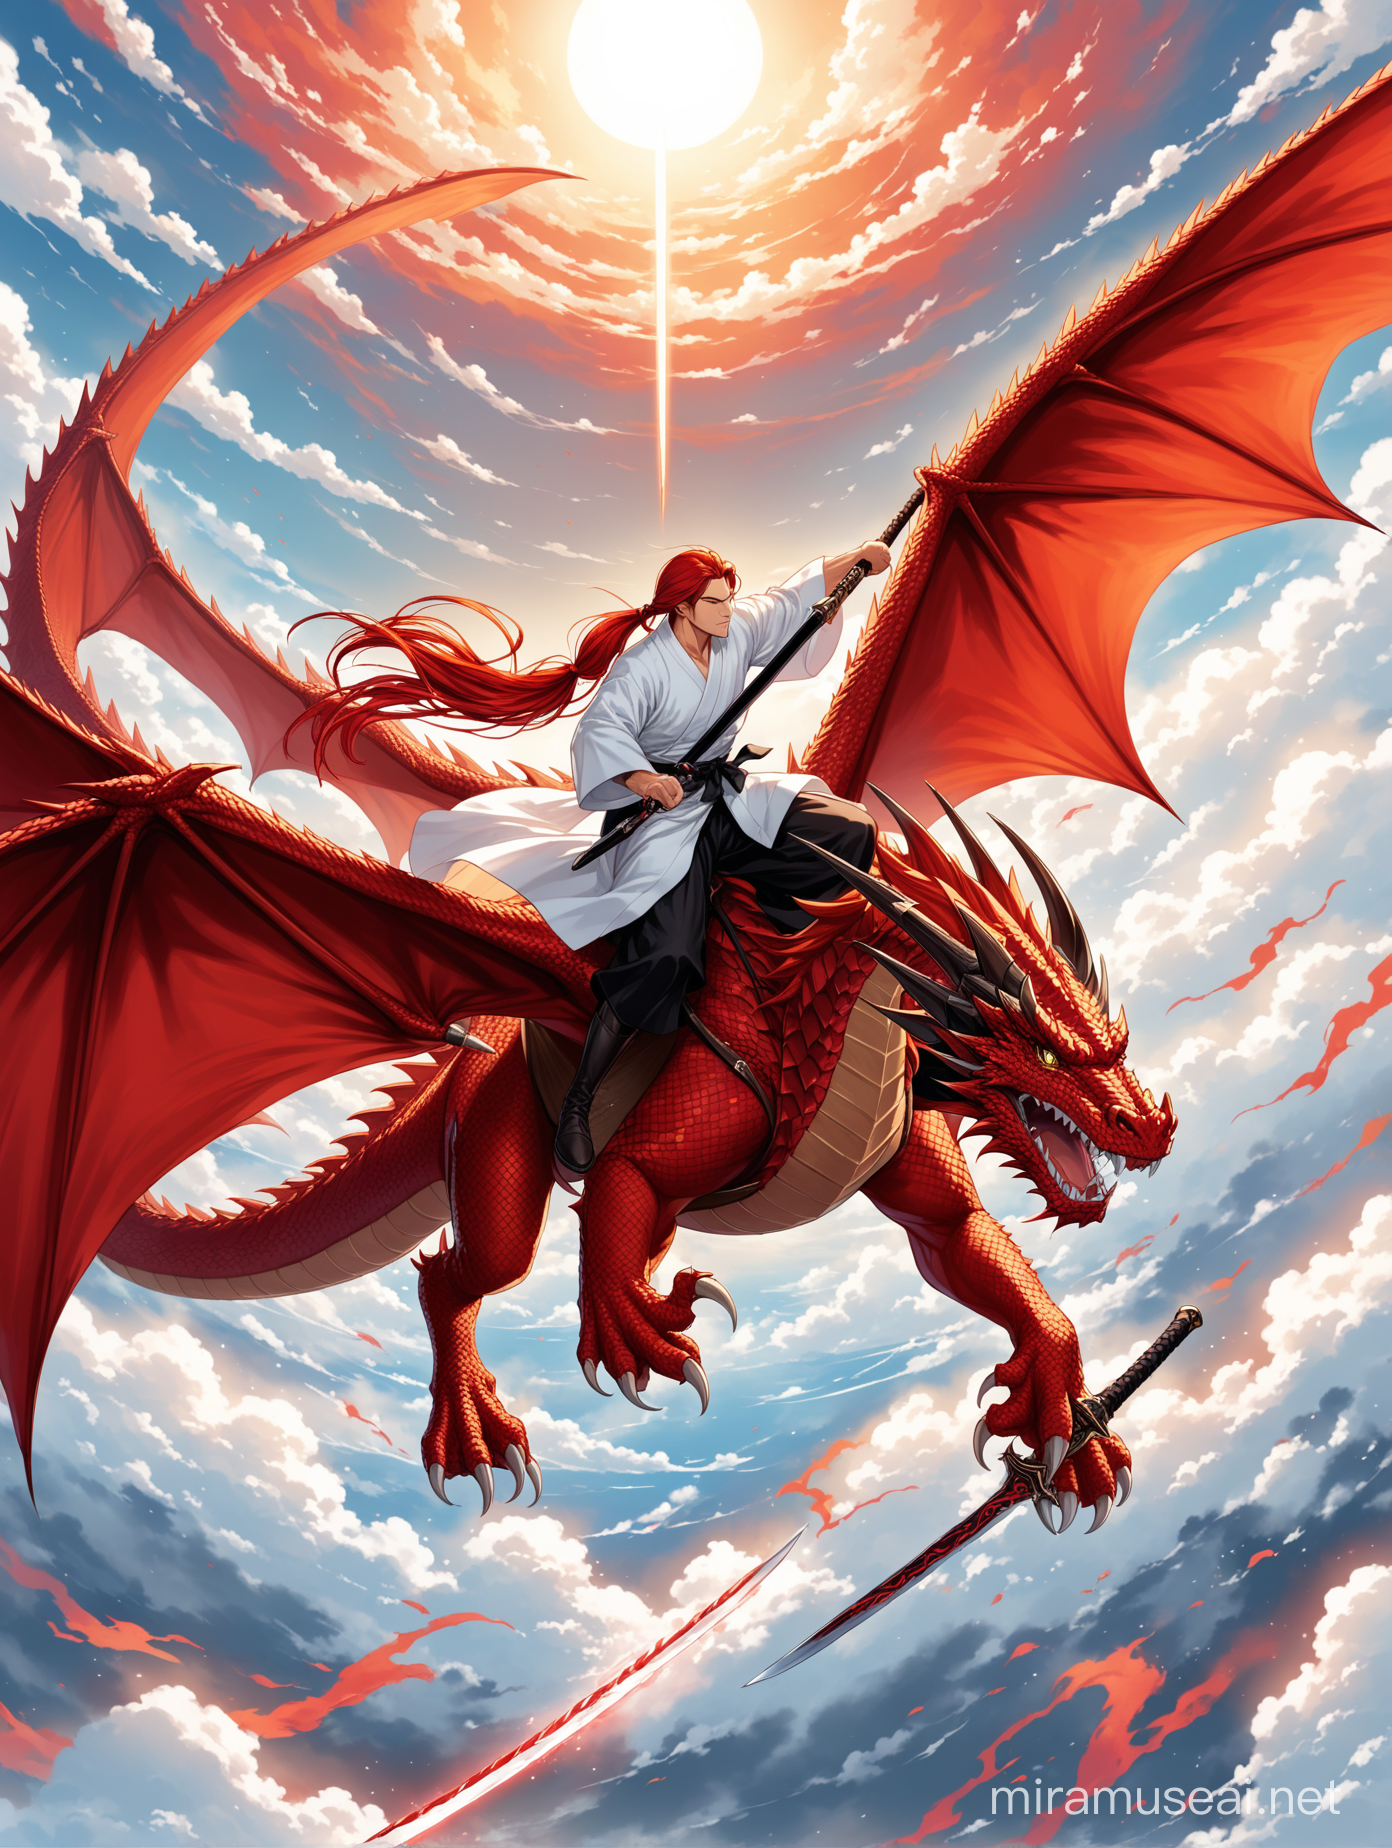 man with red long hair in a low ponytail with a black bow fighting in the sky riding a red dragon with an executioner's blade he is wearing a white Chinese robe.